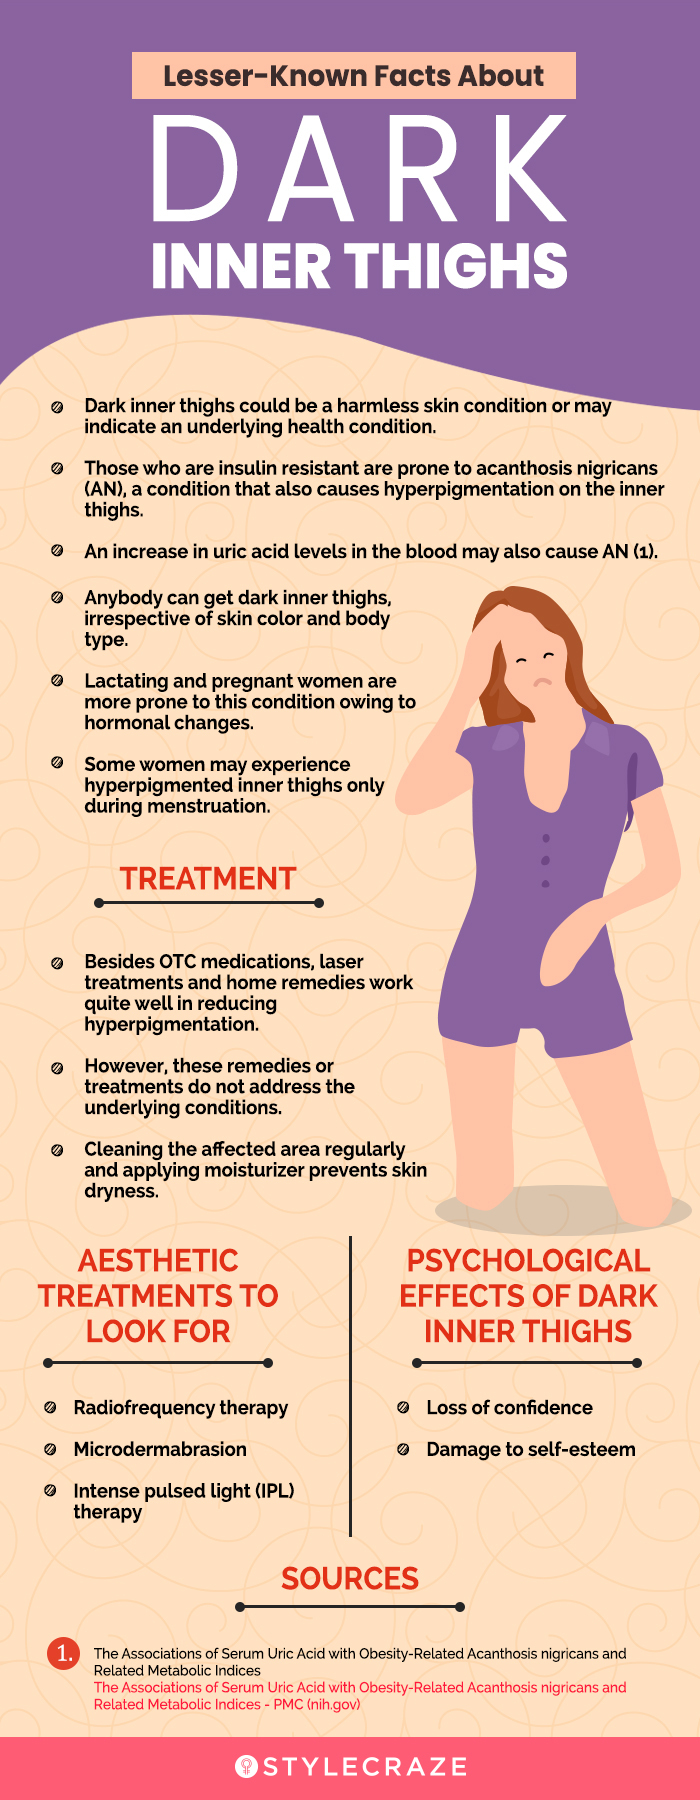 11 Home Remedies For Dark Inner Thighs And Prevention Tips